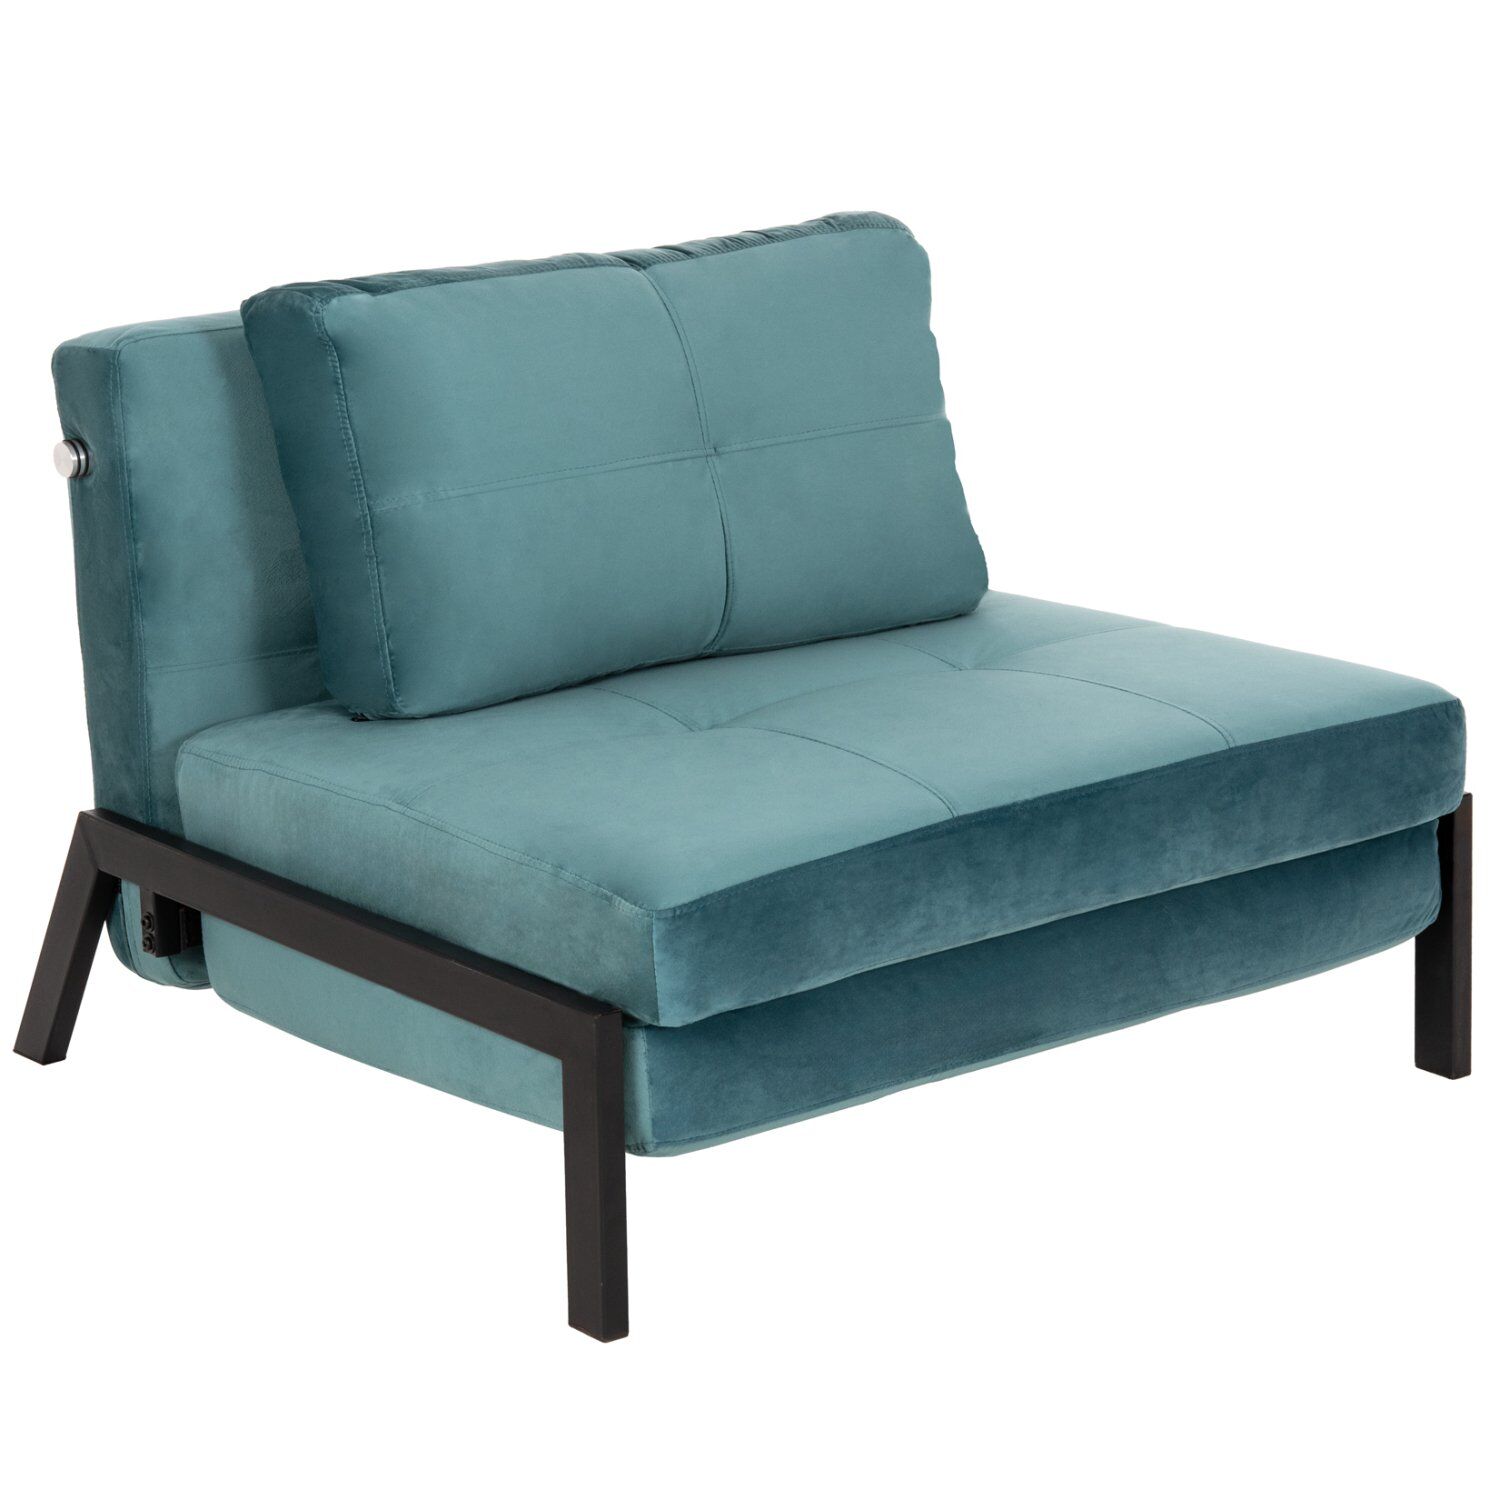 EASYCHAIR/BED CONSTANCE HM3078.15 TURQUOISE COLORED VELVET 95x92x66Hcm.